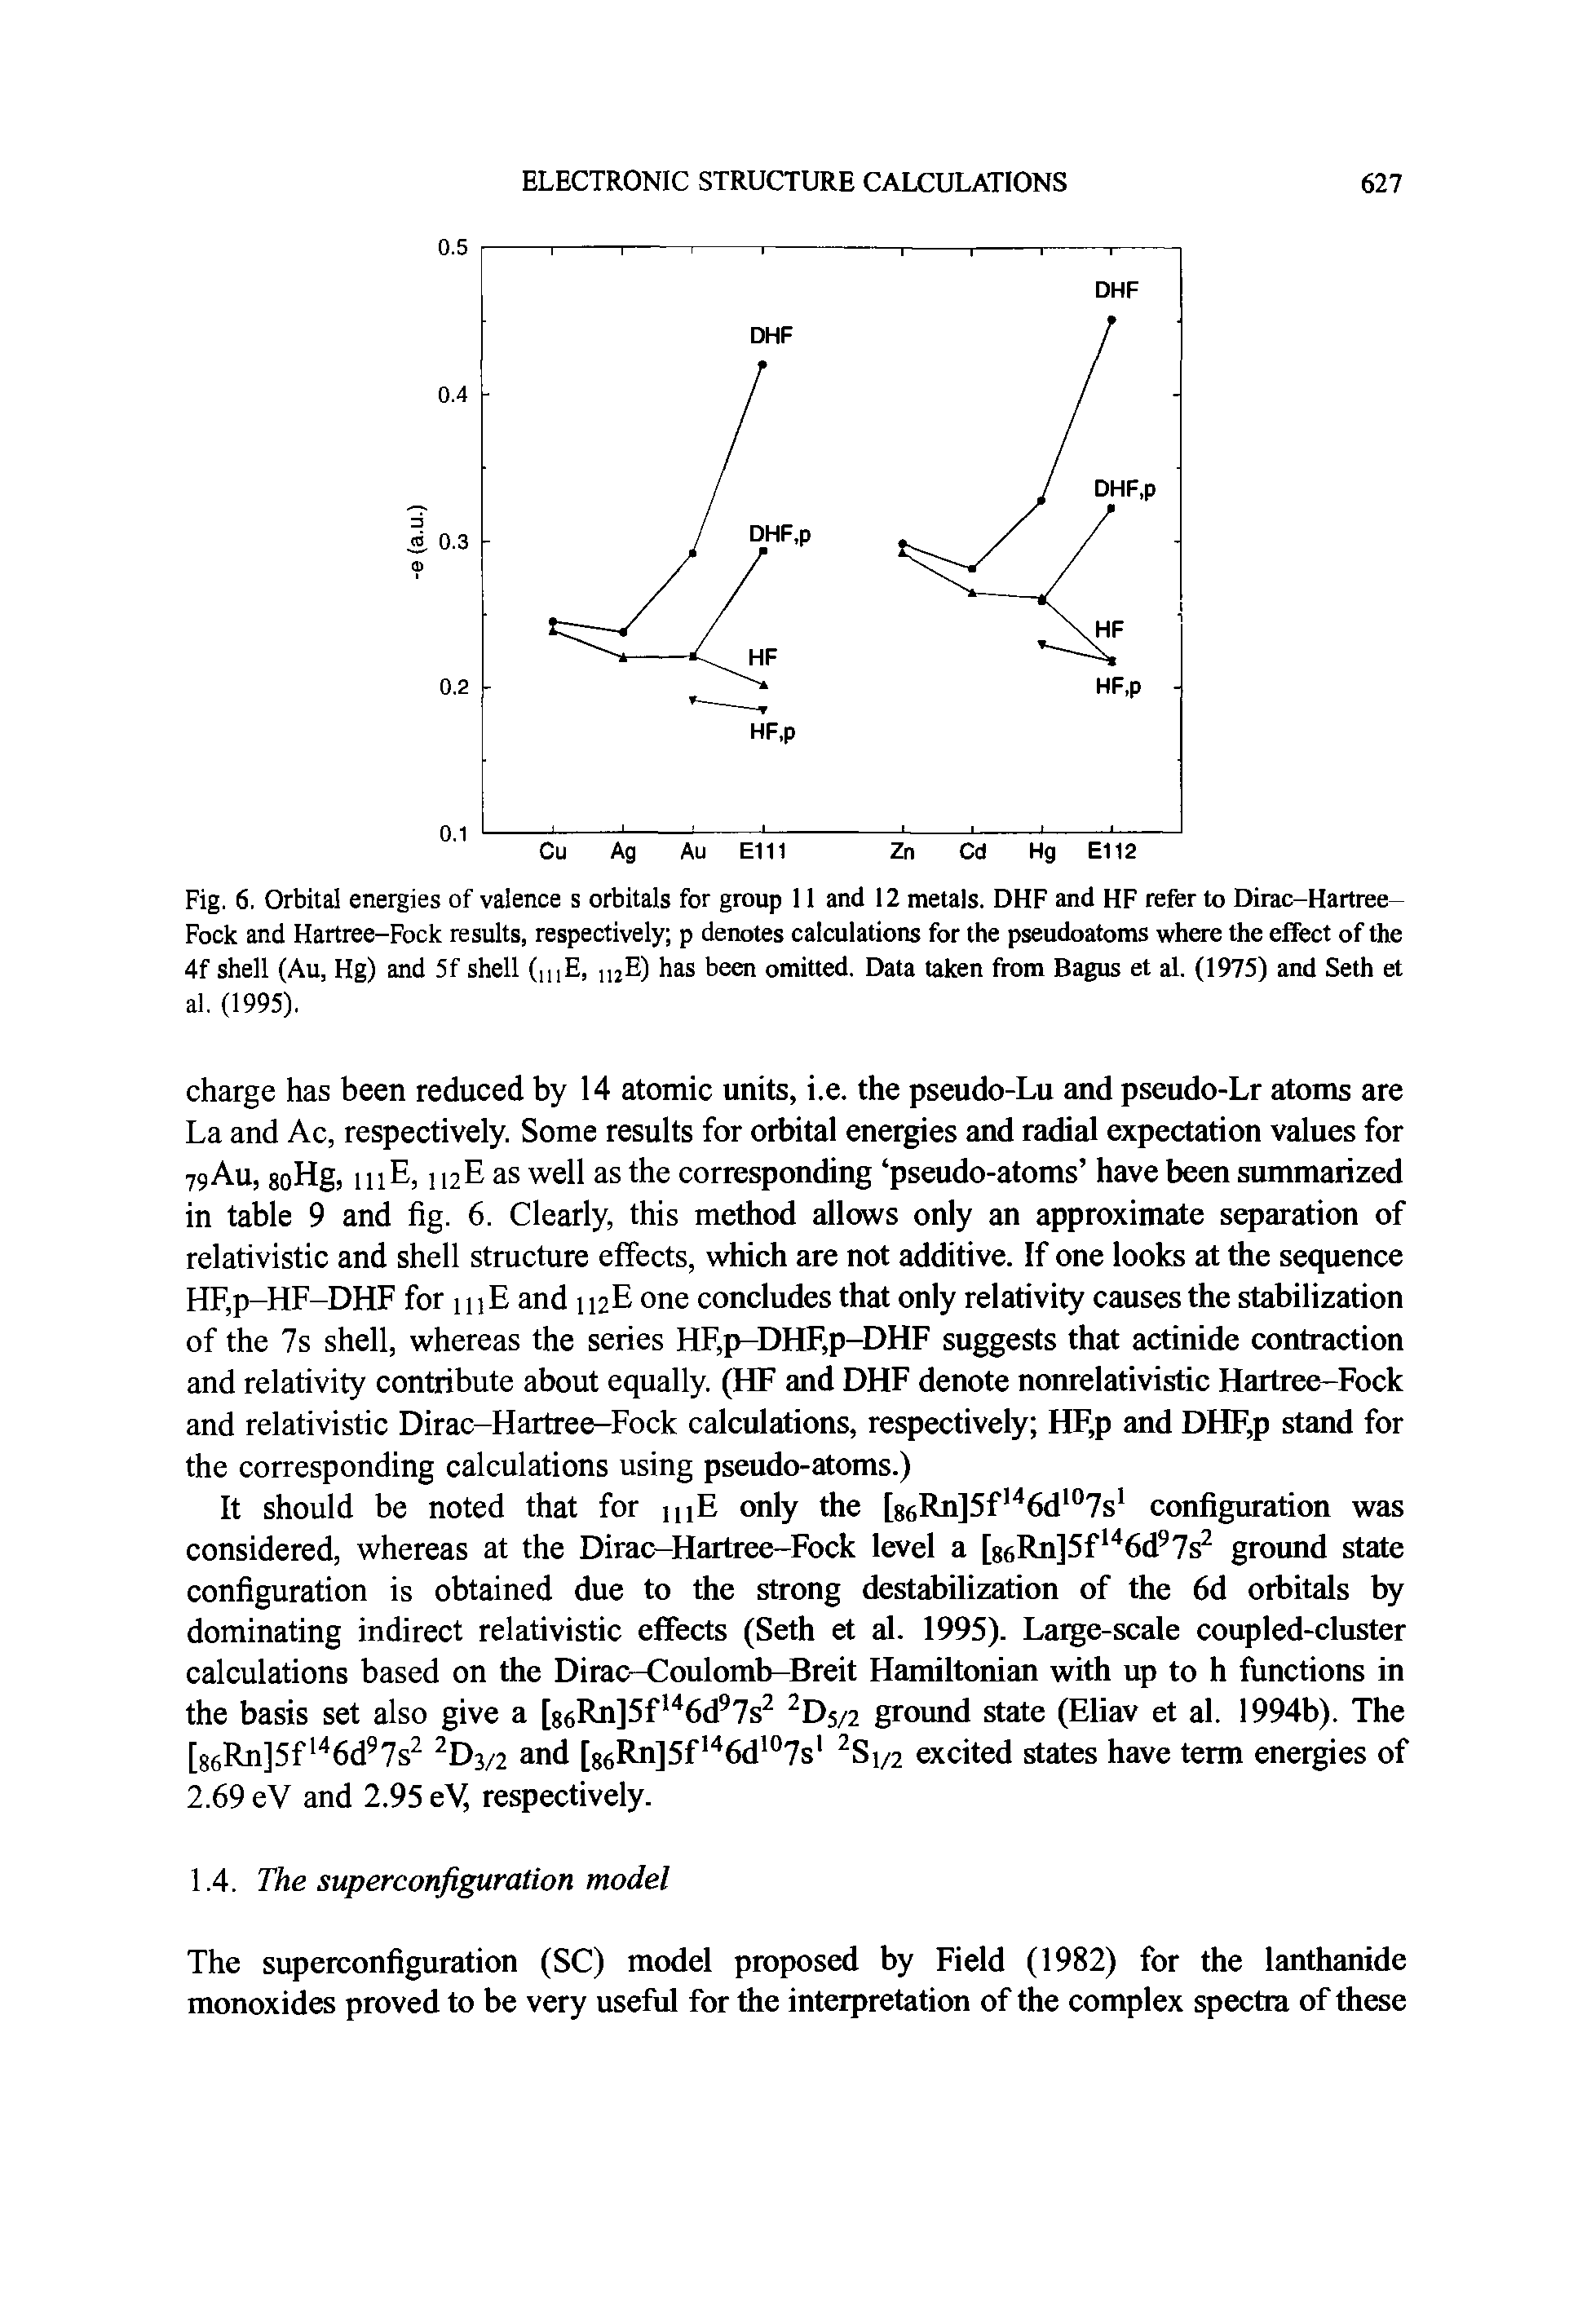 Fig. 6. Orbital energies of valence s orbitals for group 11 and 12 metals. DHF and HF refer to Dirac-Hartree Fock and Hartree-Fock results, respectively p denotes calculations for the pseudoatoms where the effect of the 4f shell (Au, Hg) and 5f shell (,nE, ujE) has been omitted. Data taken from Bagus et al. (1975) and Seth et...